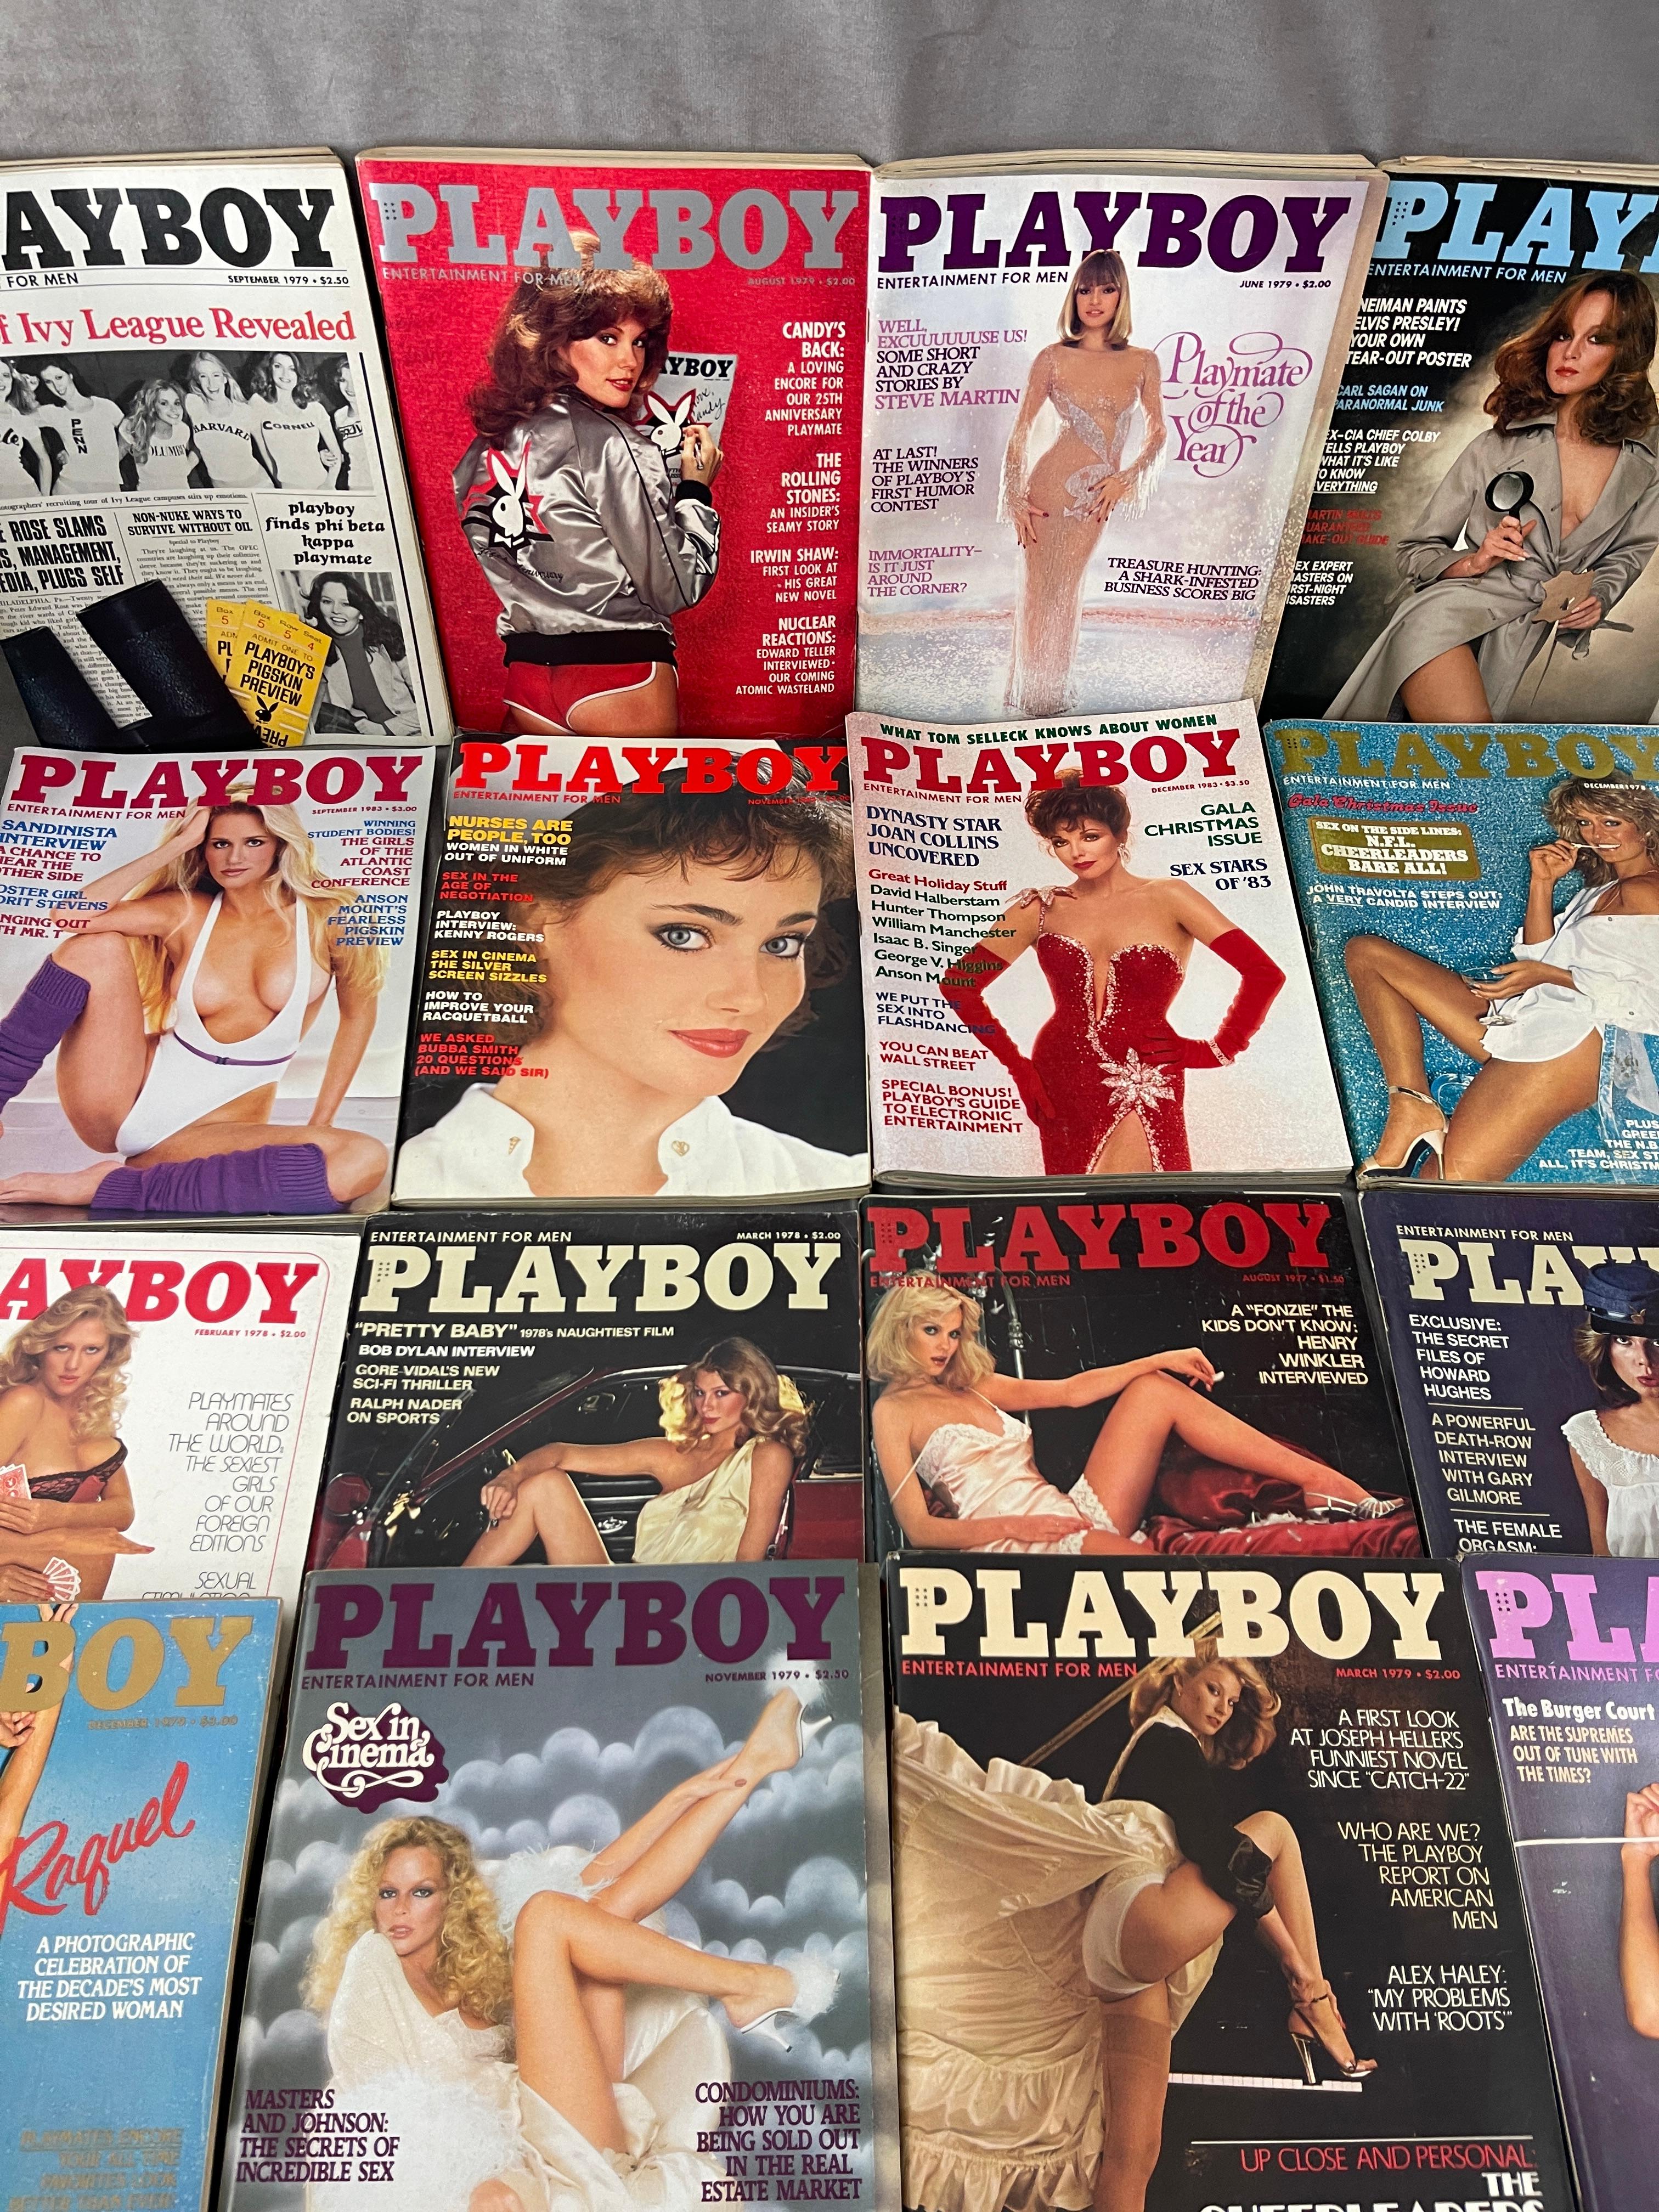 Vintage 1970's Playboy Magazine Collection Lot